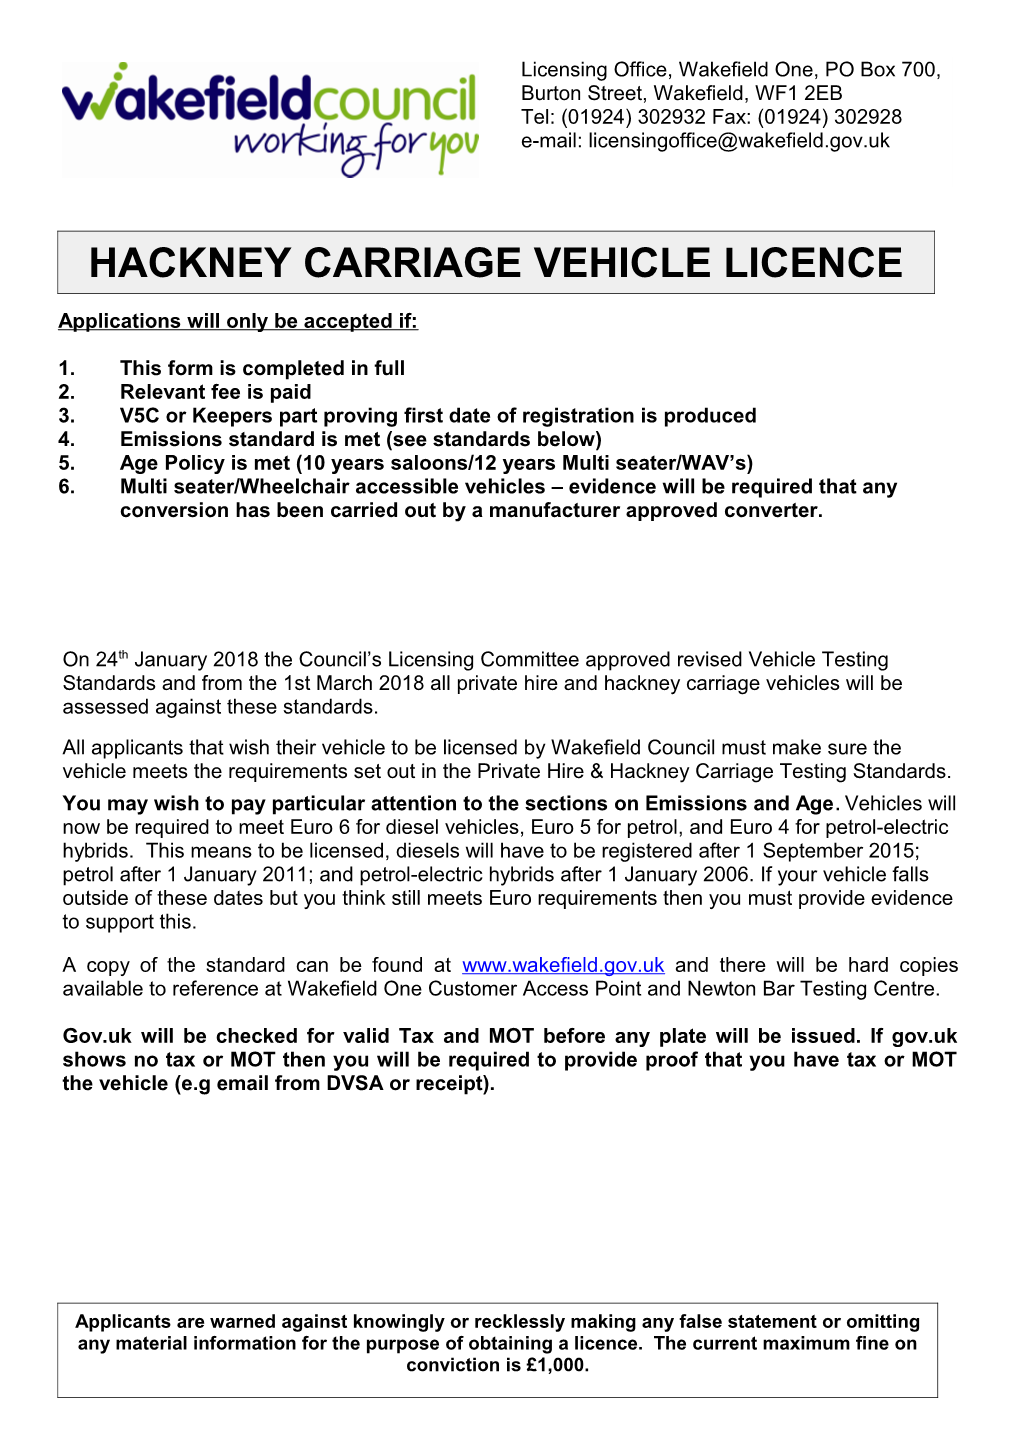 Private Hire Vehicle Application